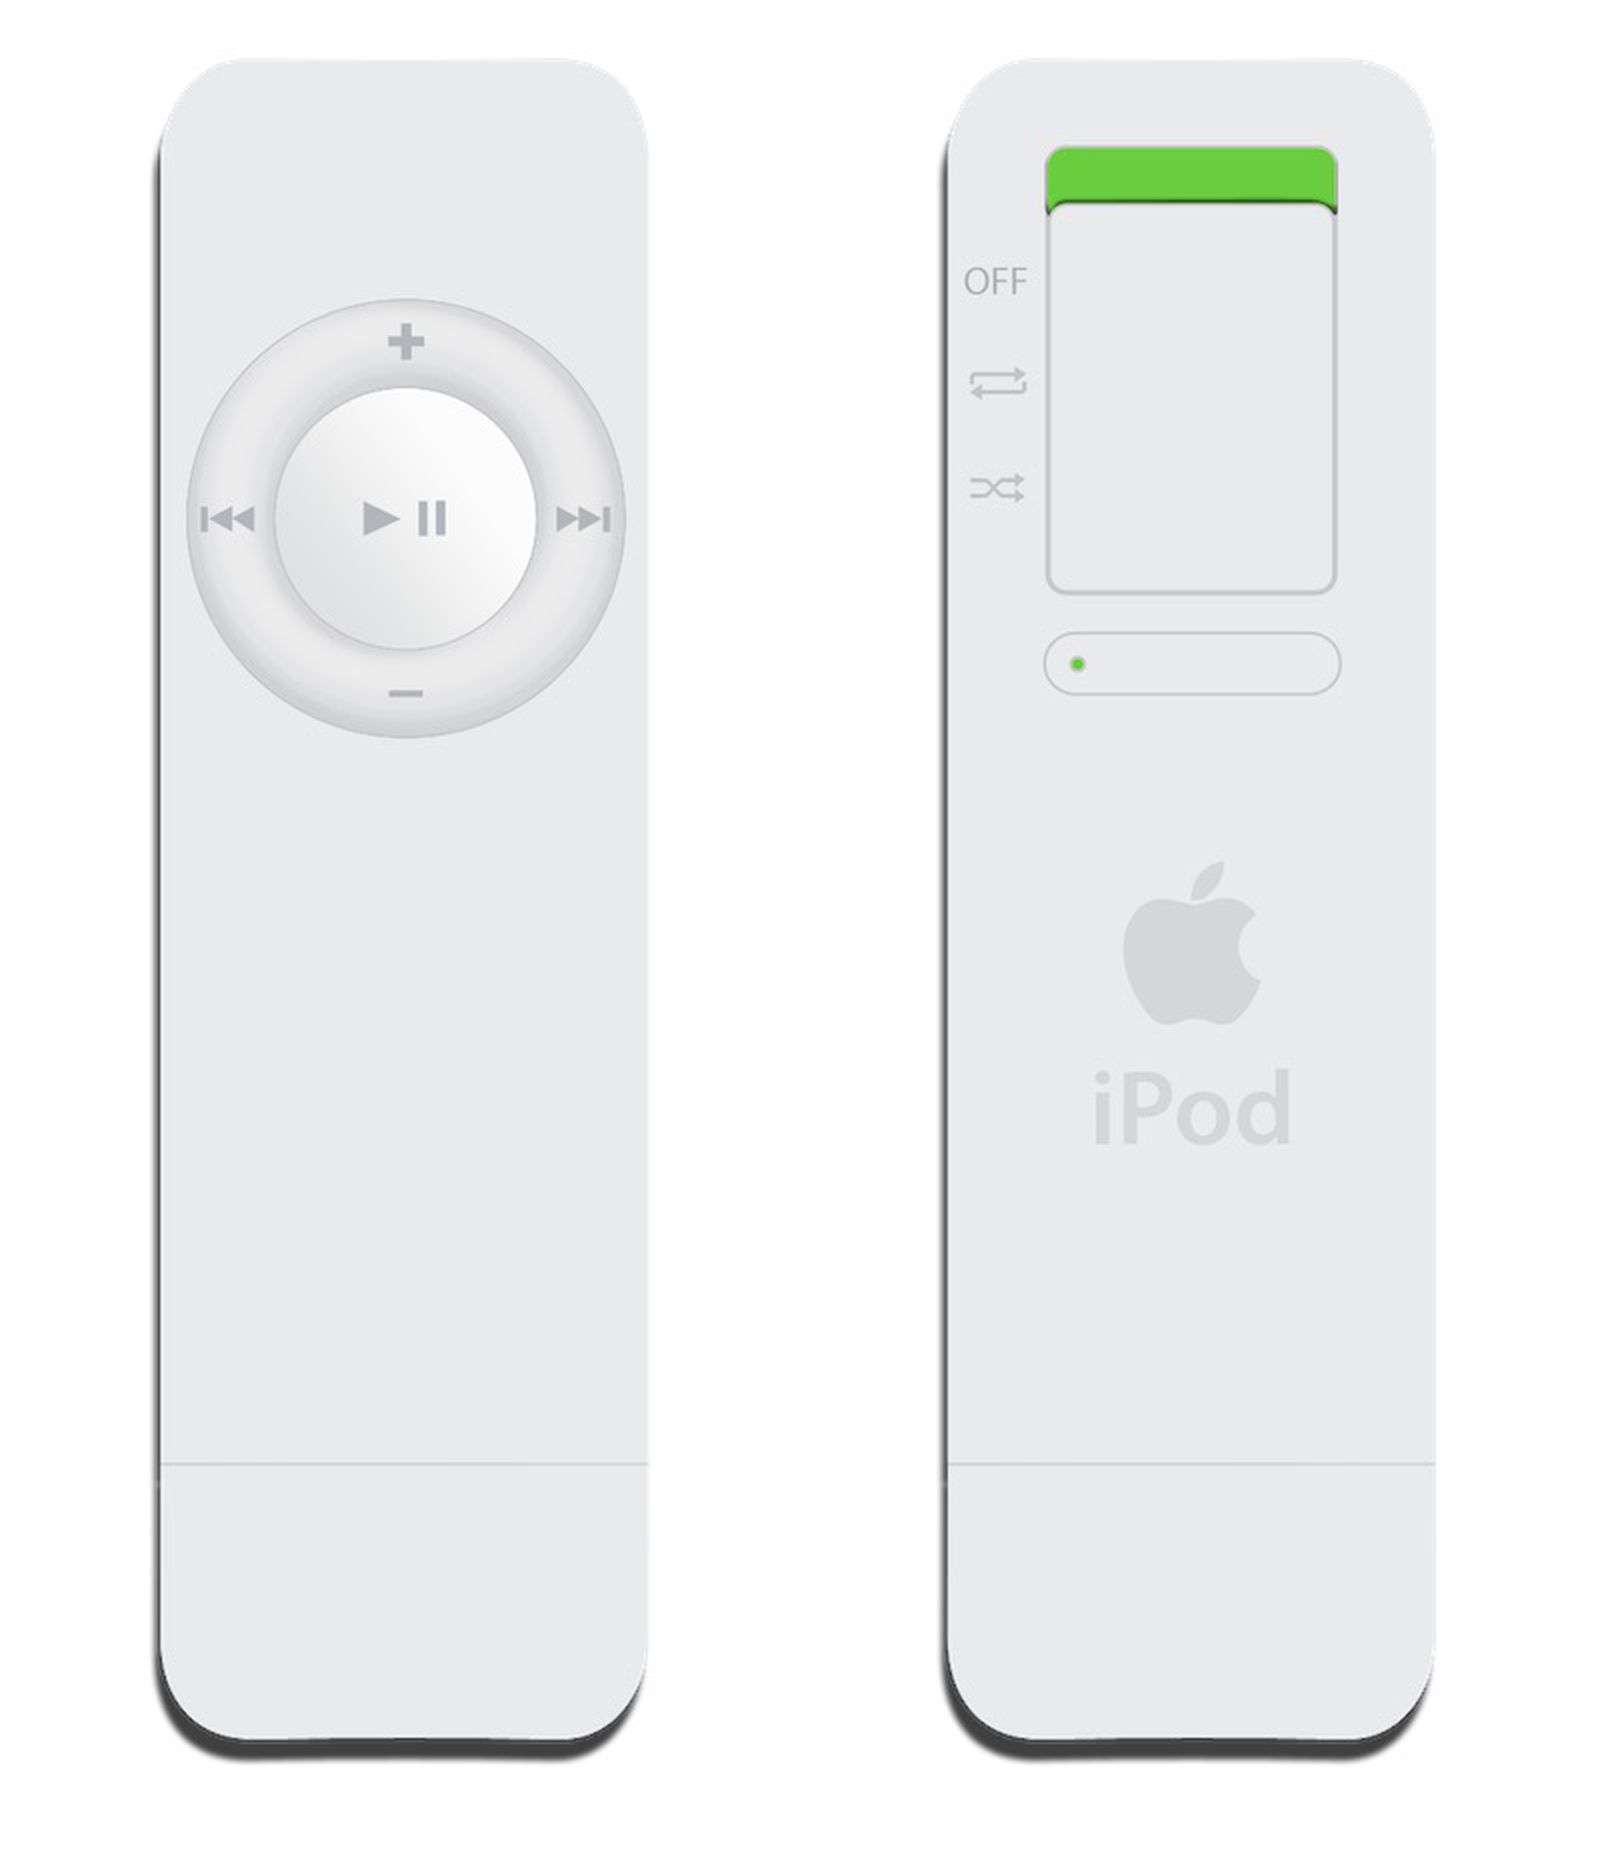 First-Generation iPod Shuffle Turns Today -